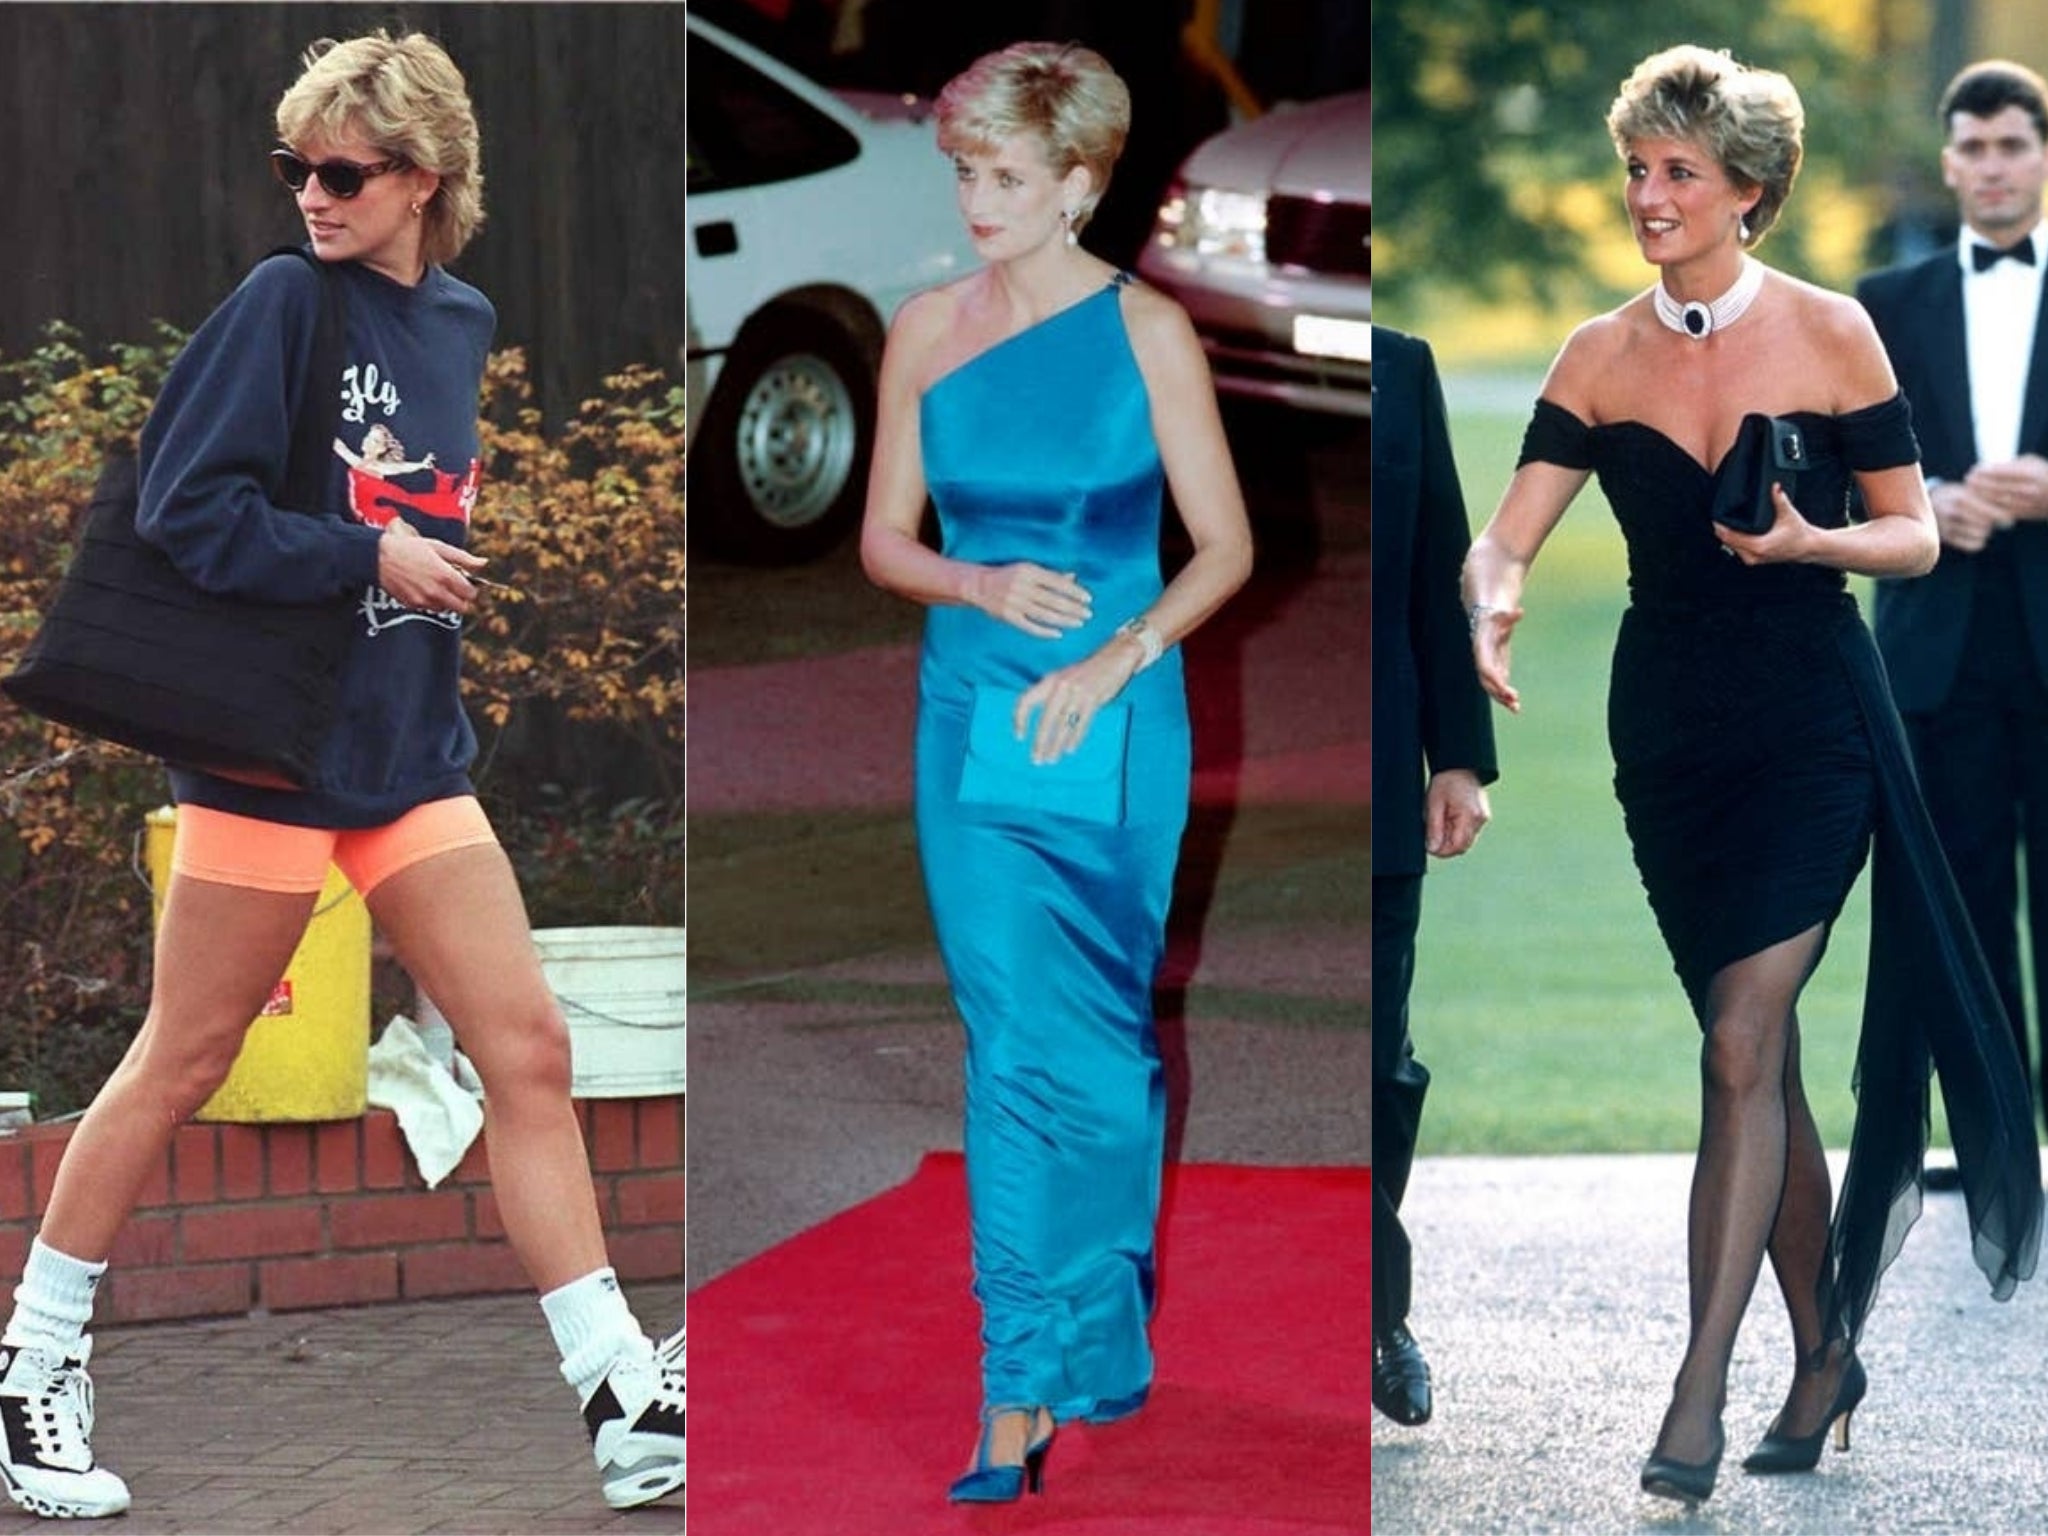 Princess Diana Most Iconic Fashion Moments On What Would Have Been Her